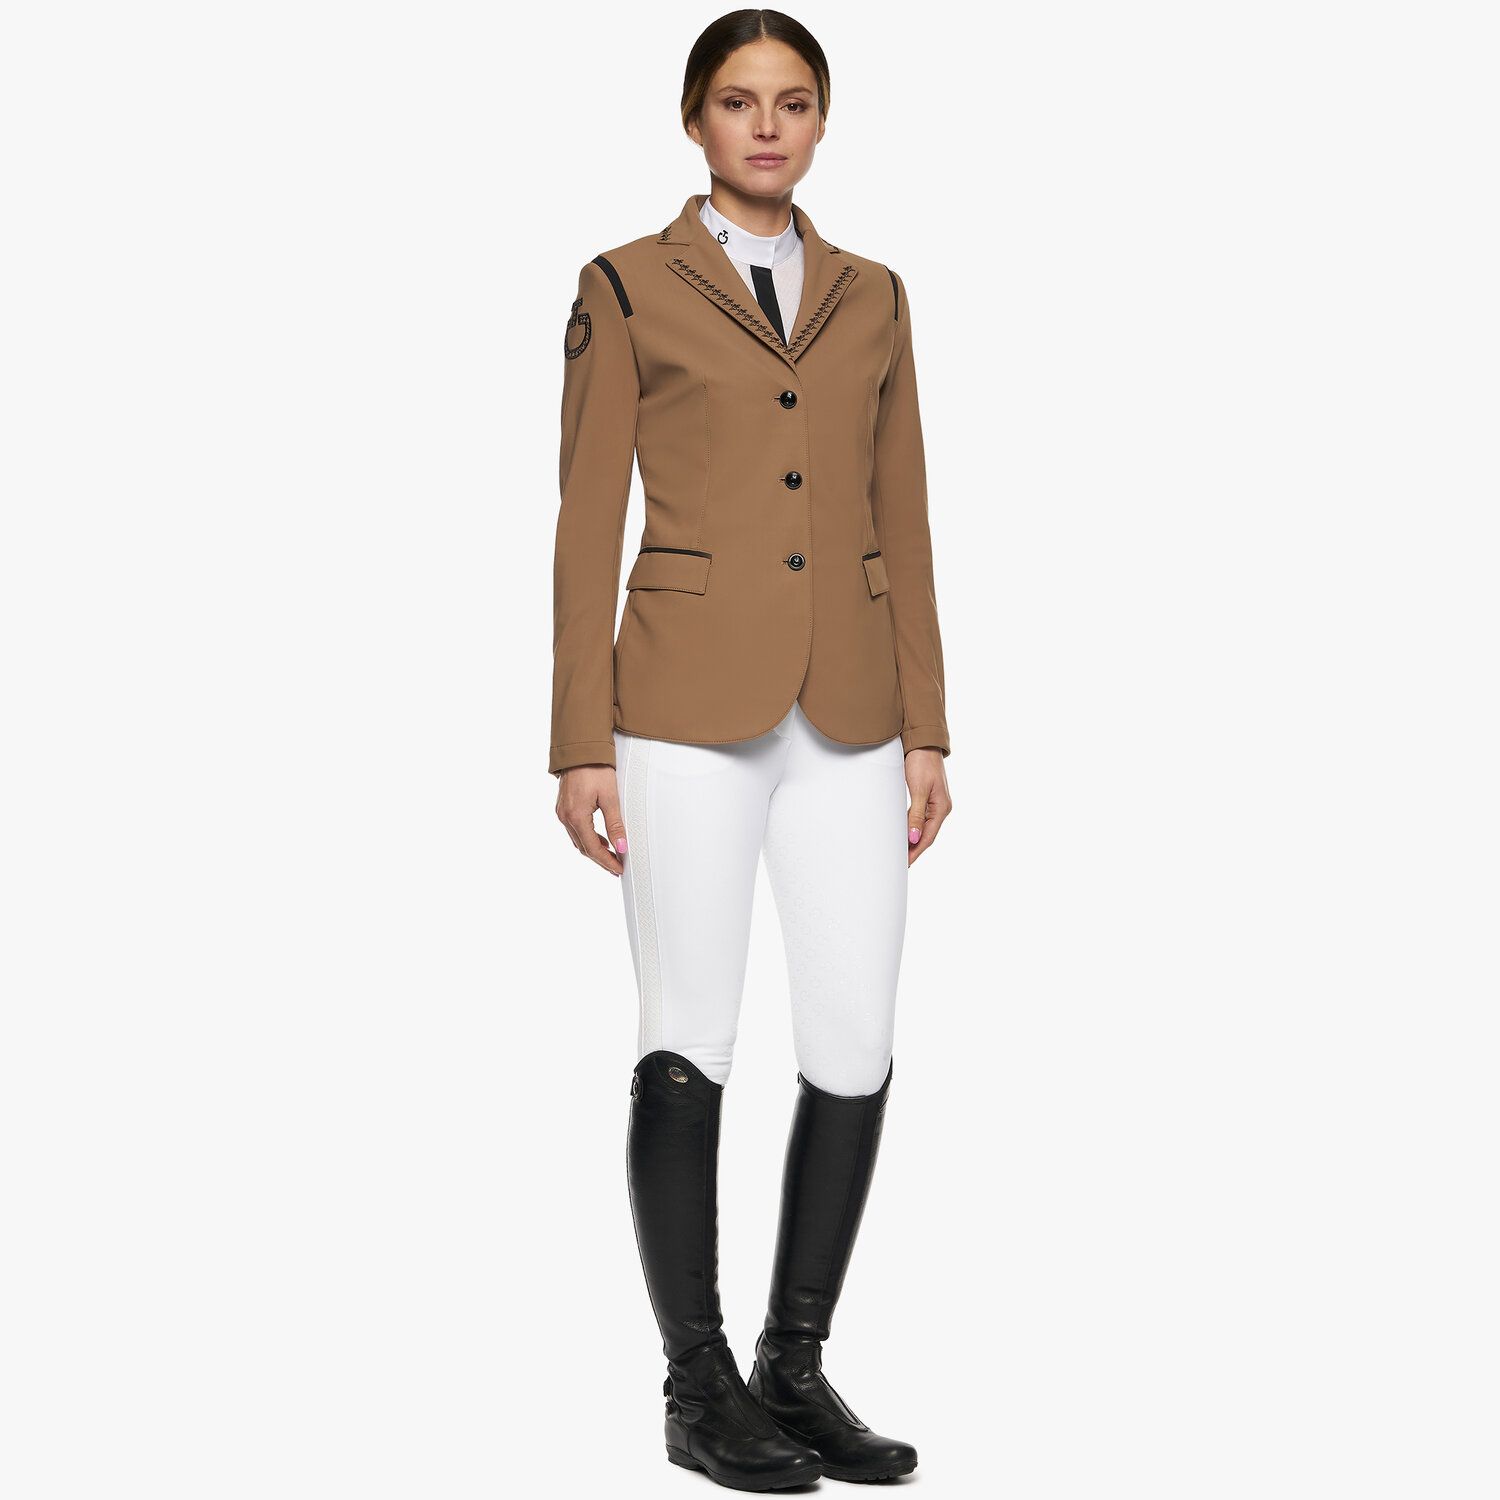 Cavalleria Toscana Women's competition riding jacket embroidery CACAO-2